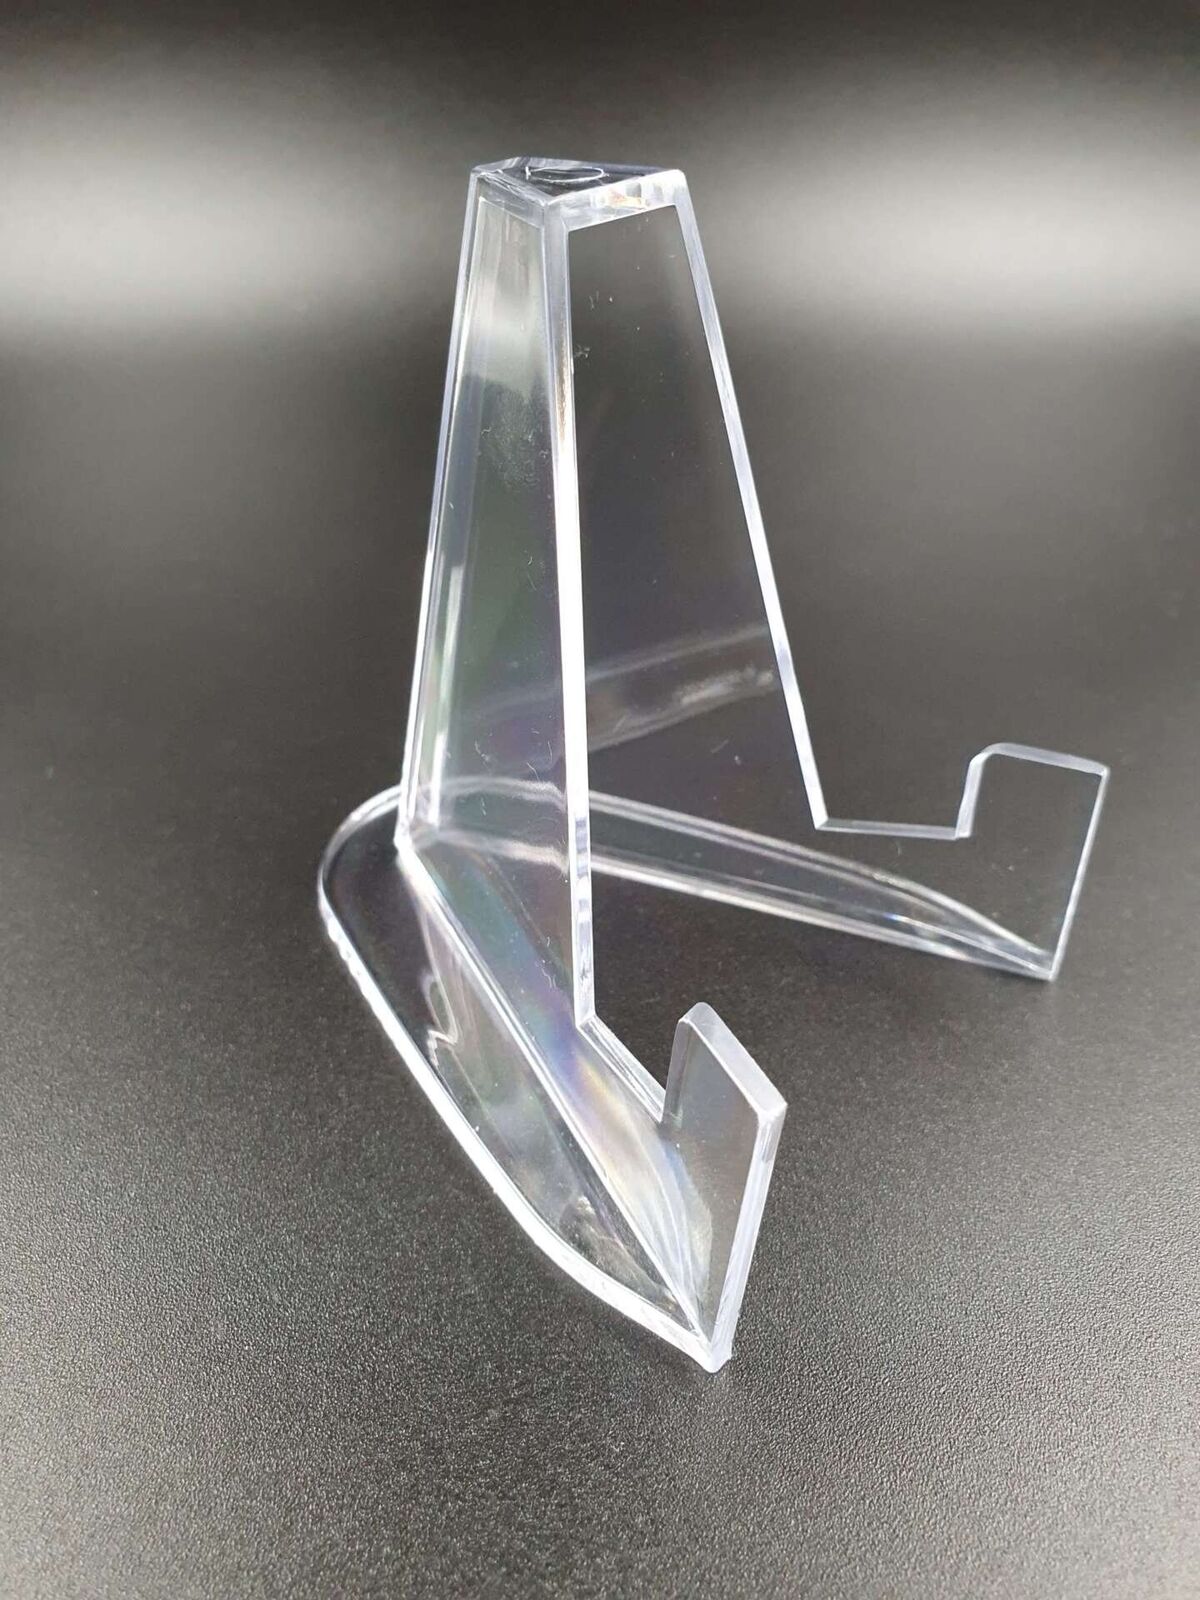 Large Acrylic Display Stand - 10 PCS (Suitable for PSA, BCG, CGC Grading Slab)